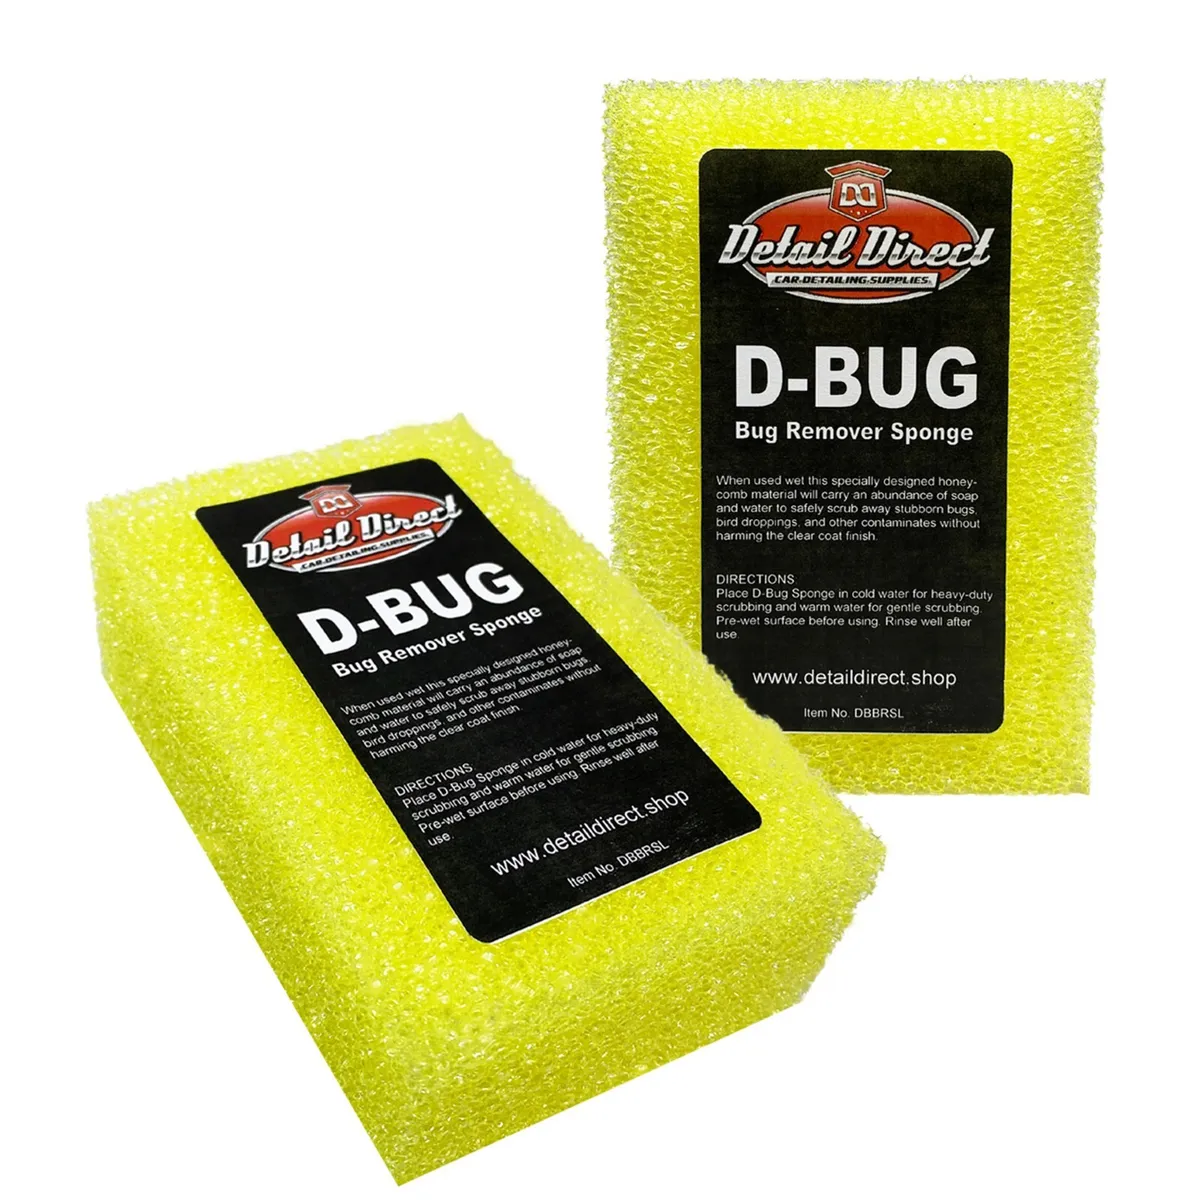 D-Bug Scrubber Sponge, Bug and Tar Remover for Cars - Mini 3x5x1.5 (2-Pack)